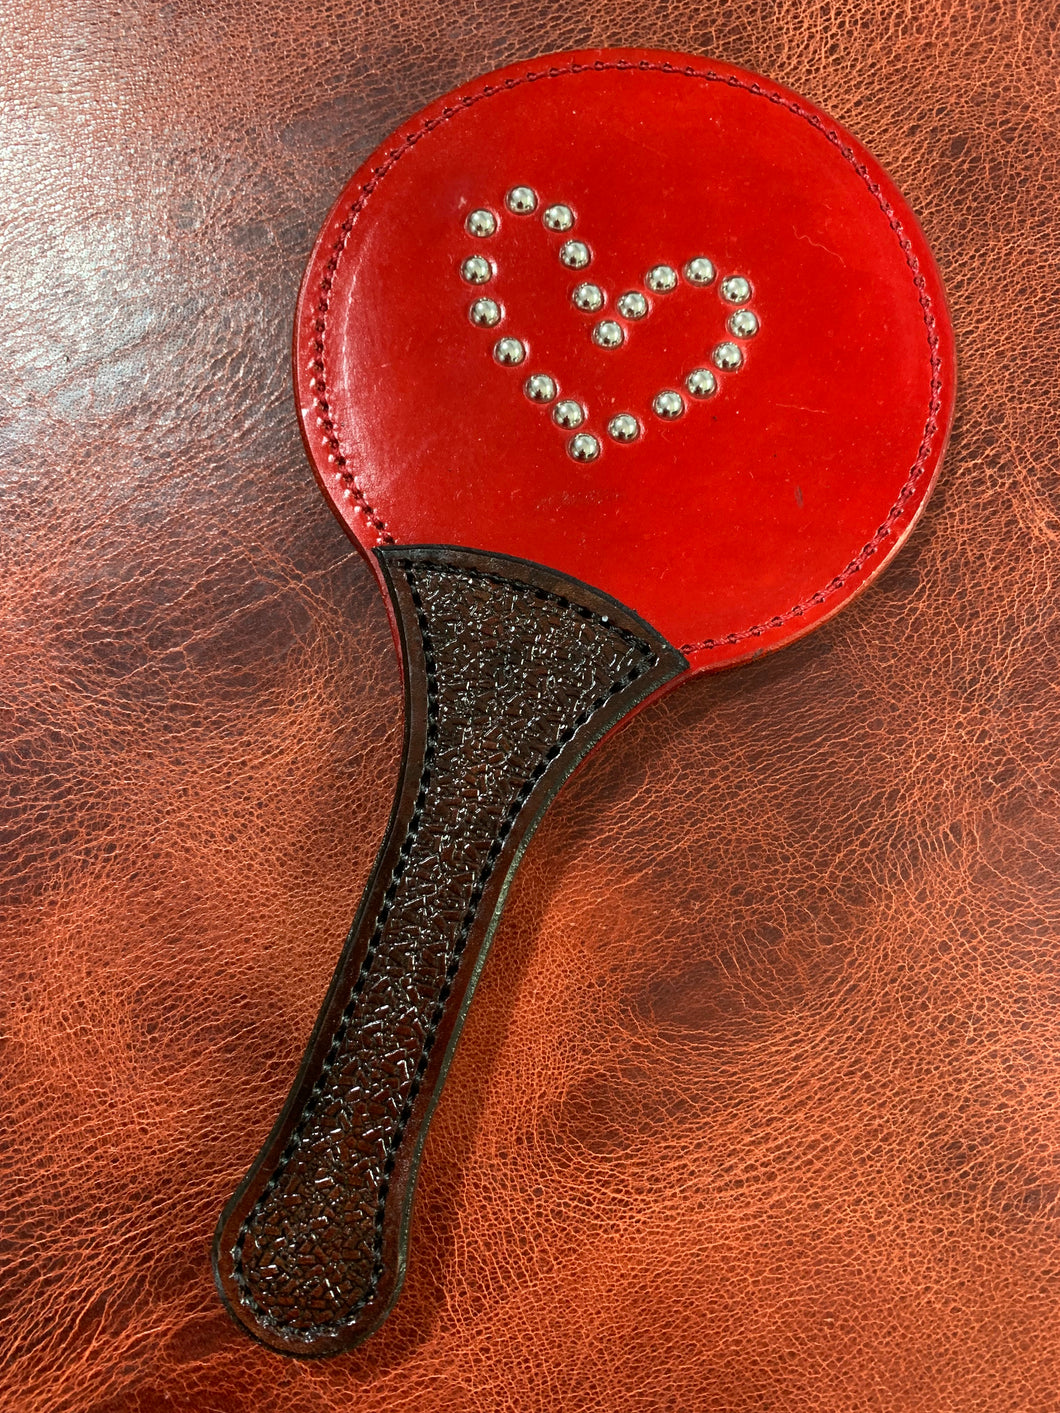 Paddle: Leather Lollipop Style, Red Rivet Heart